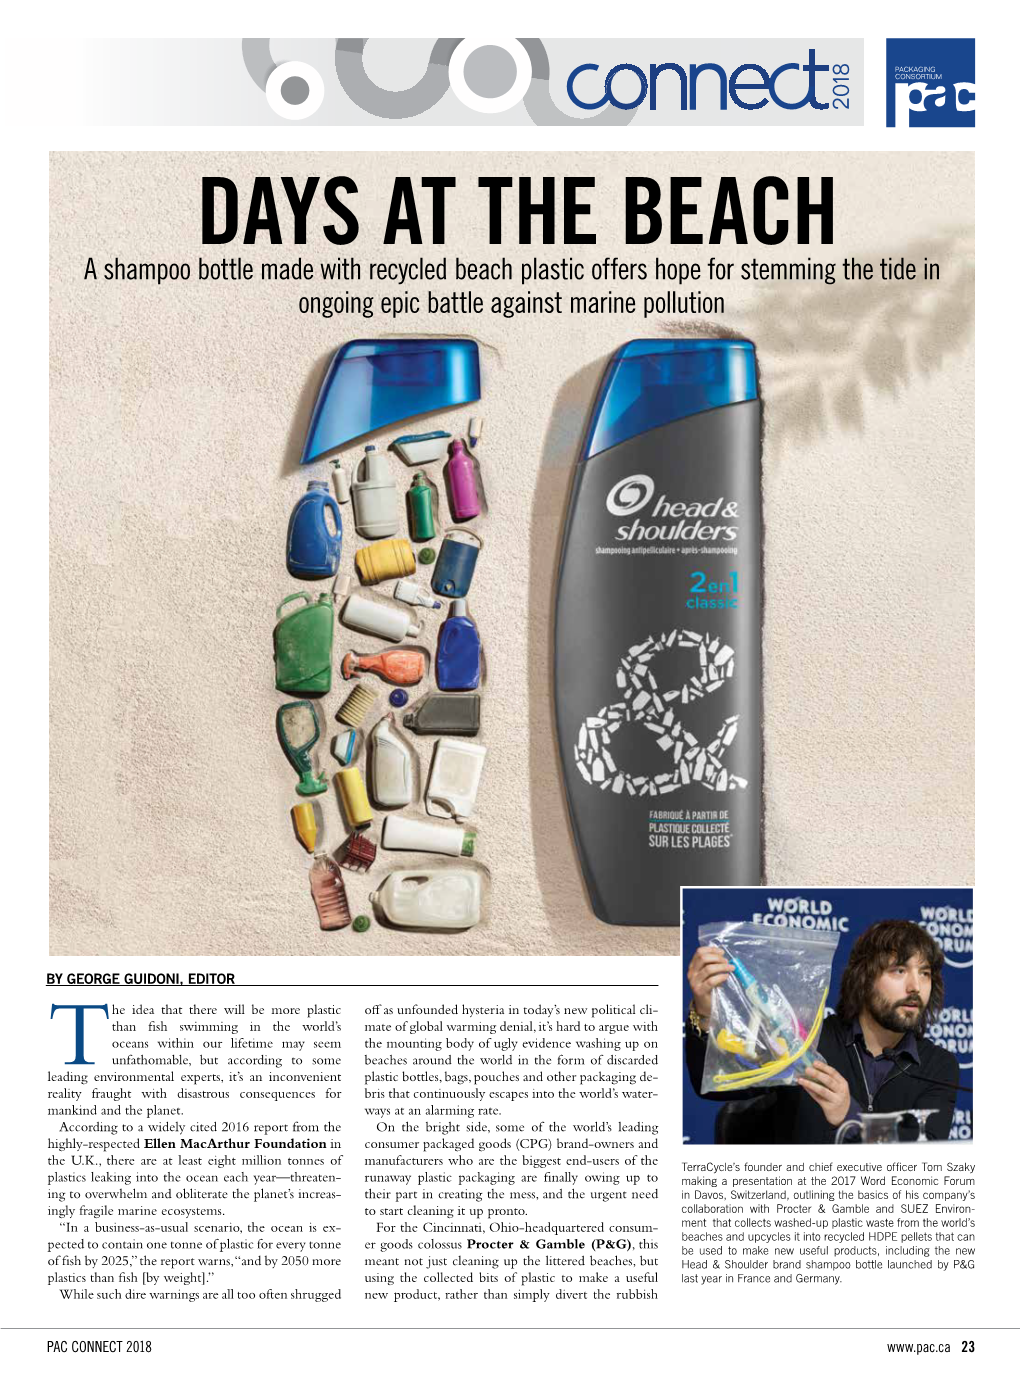 A Shampoo Bottle Made with Recycled Beach Plastic Offers Hope for Stemming the Tide in Ongoing Epic Battle Against Marine Pollution